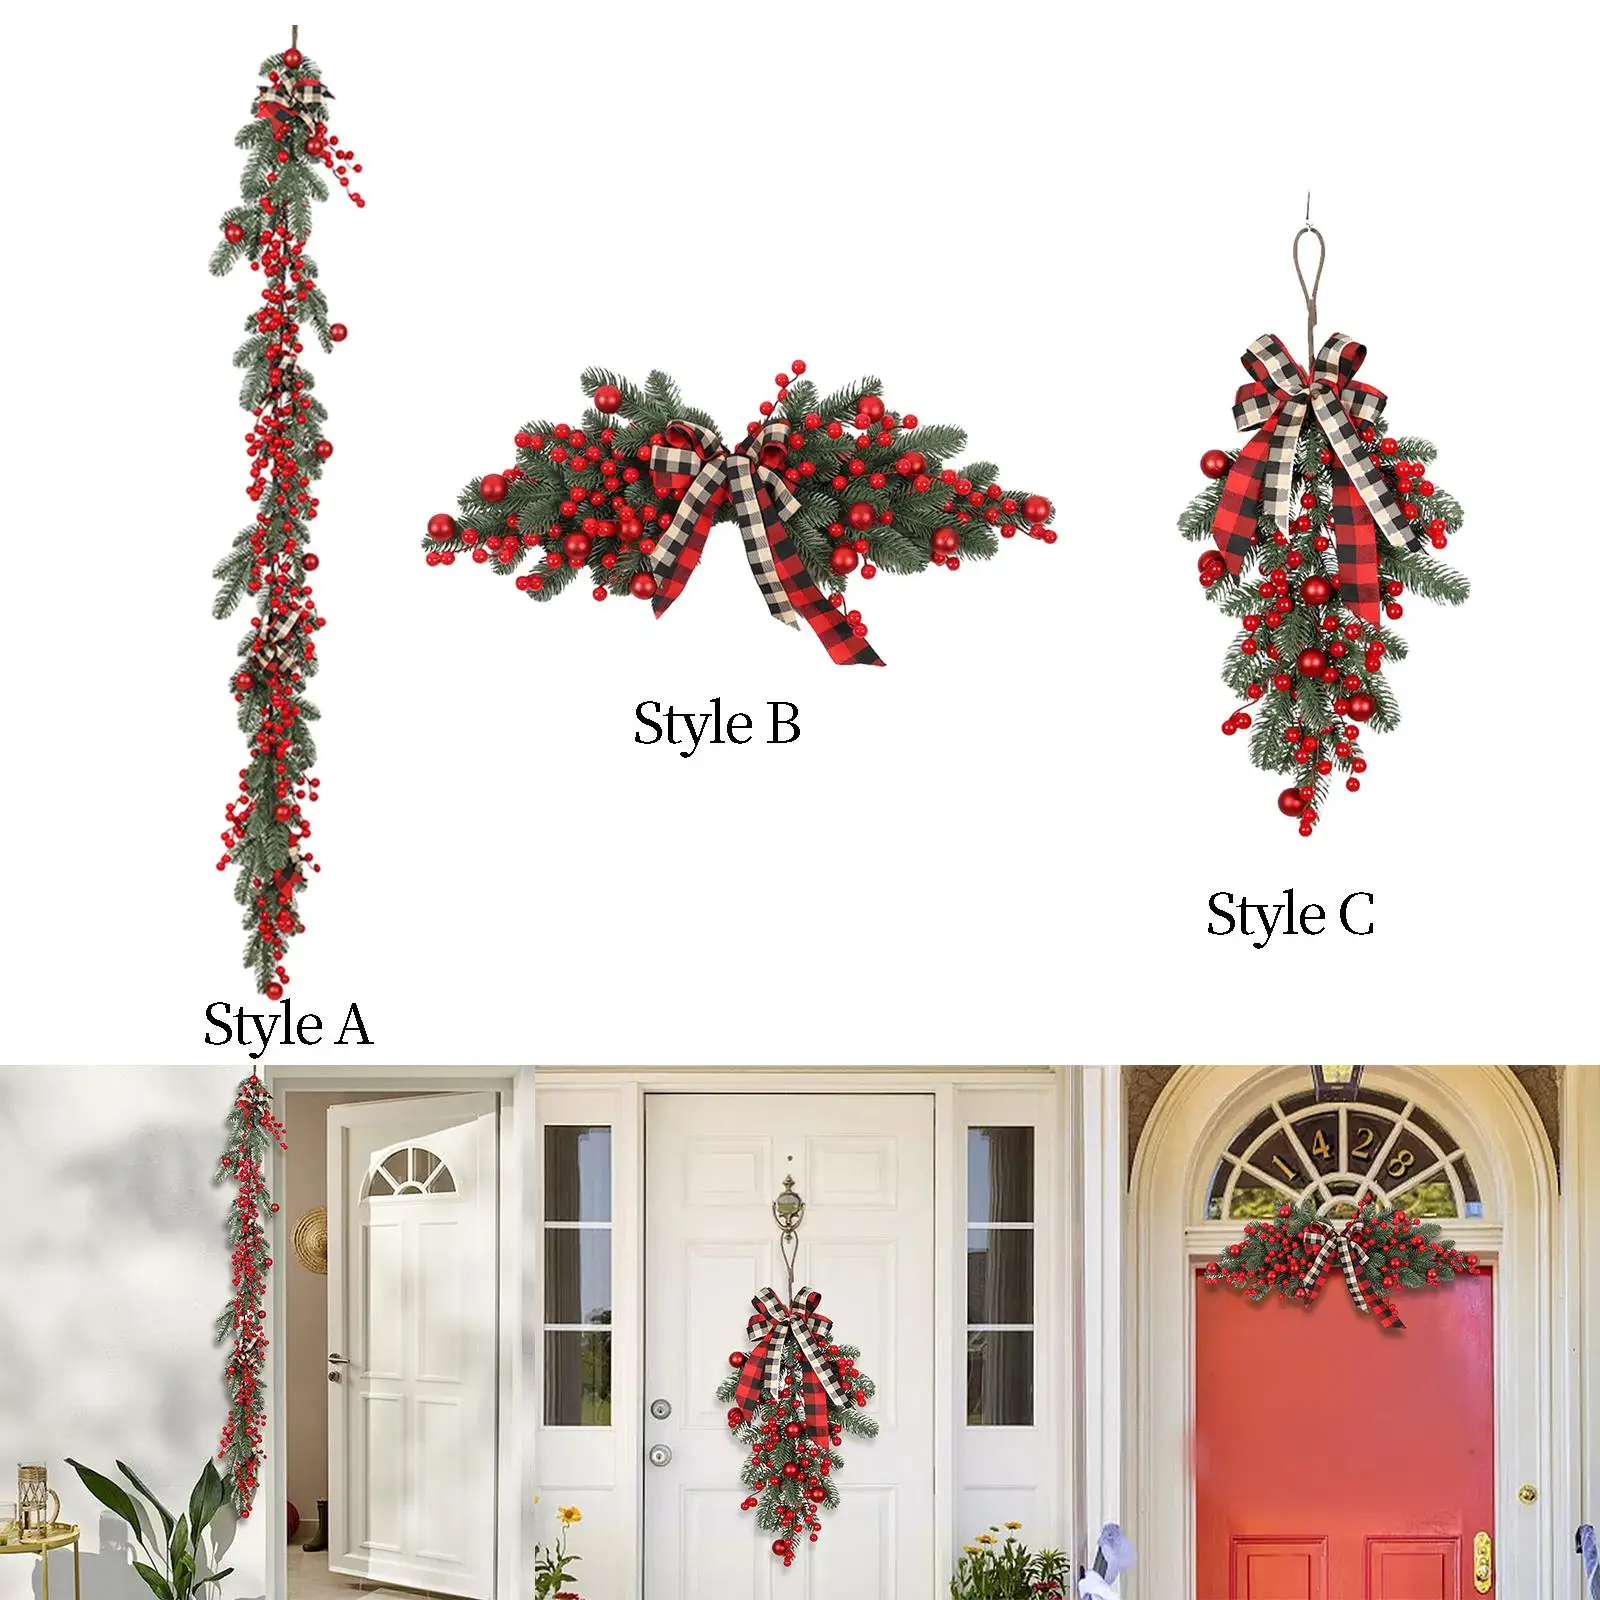 Christmas Wreath Artificial Red Berries Snowy Branch Wreath Wall Hanging Xmas Garland for New Year Xmas Festival Party Window